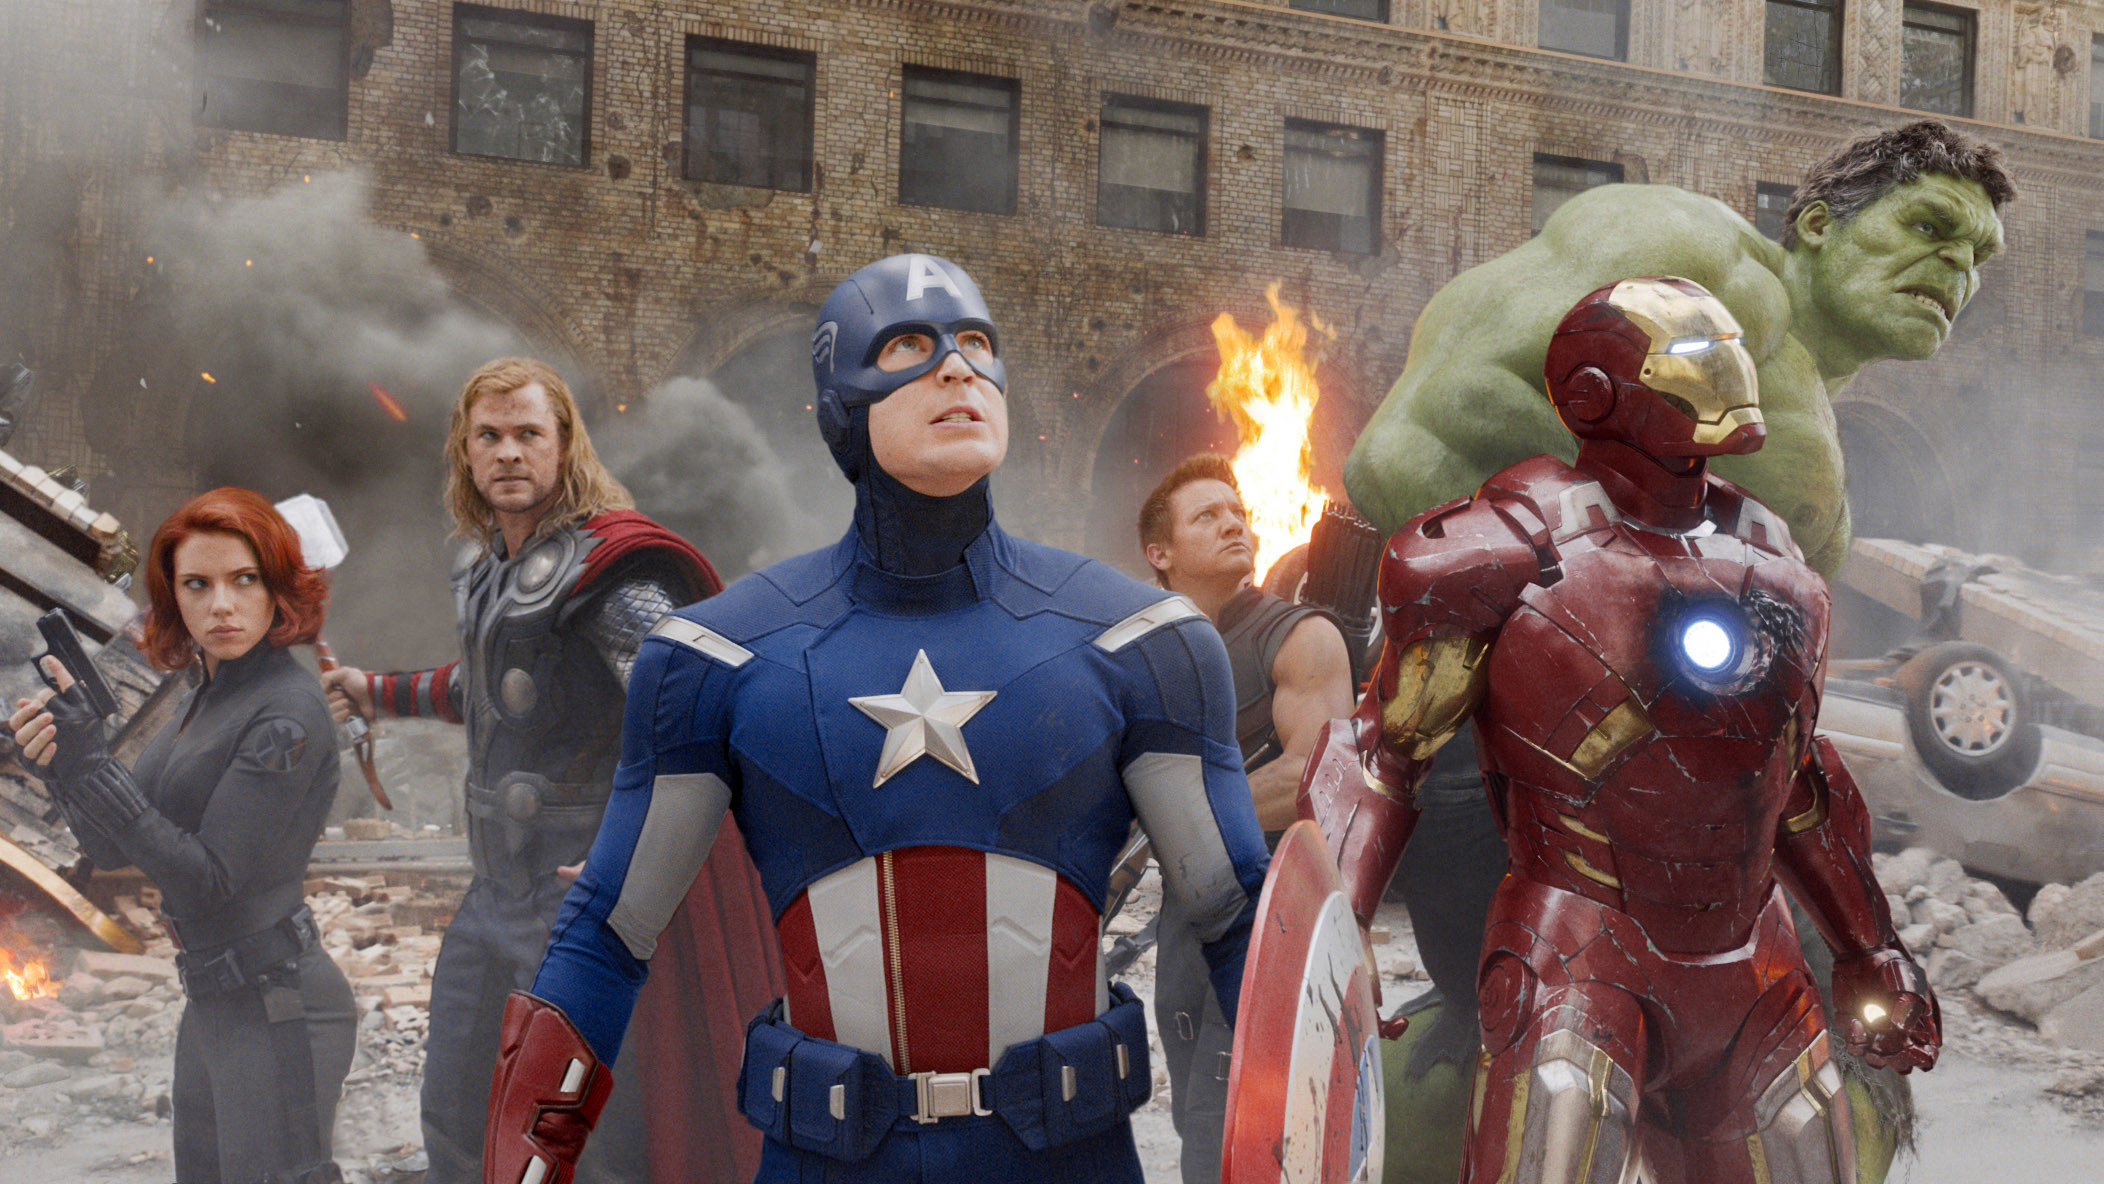 Black Widow, Thor, Captain America, Hawkeye, Iron Man and the Hulk in &quot;The Avengers.&quot;